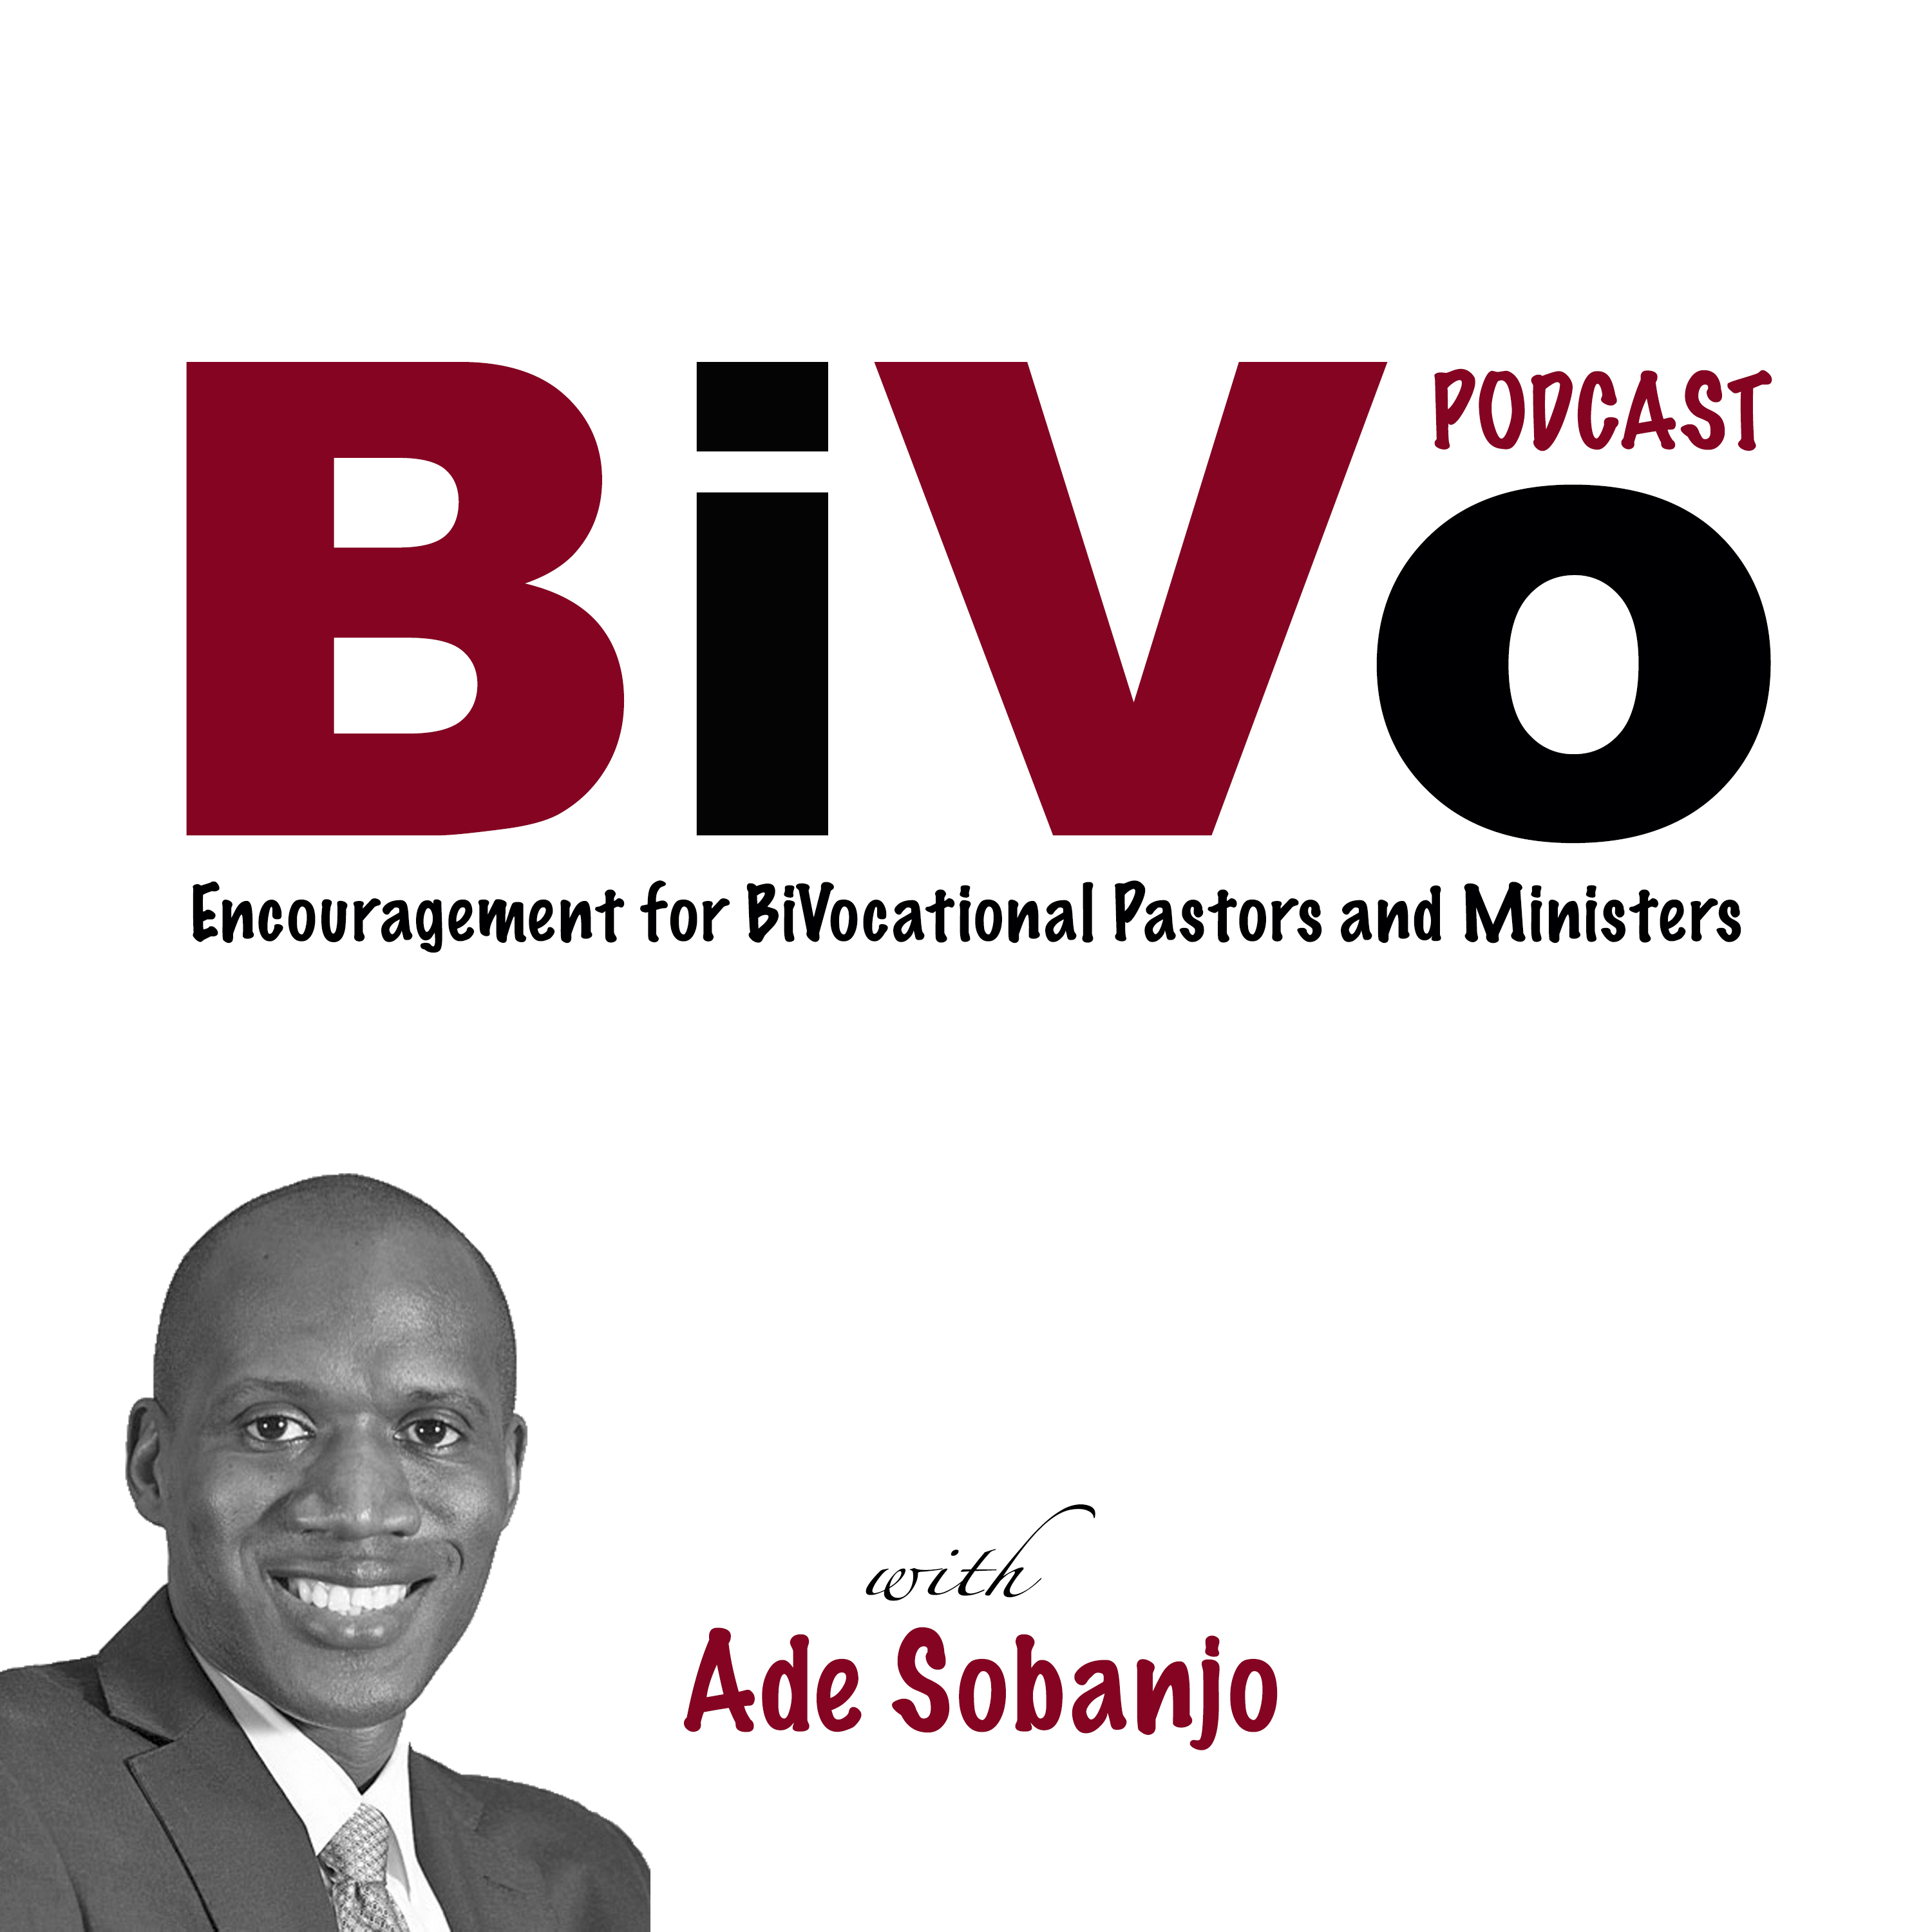 BiVo Podcast: Encouragement for BiVocational Pastors and Cell church Ministers